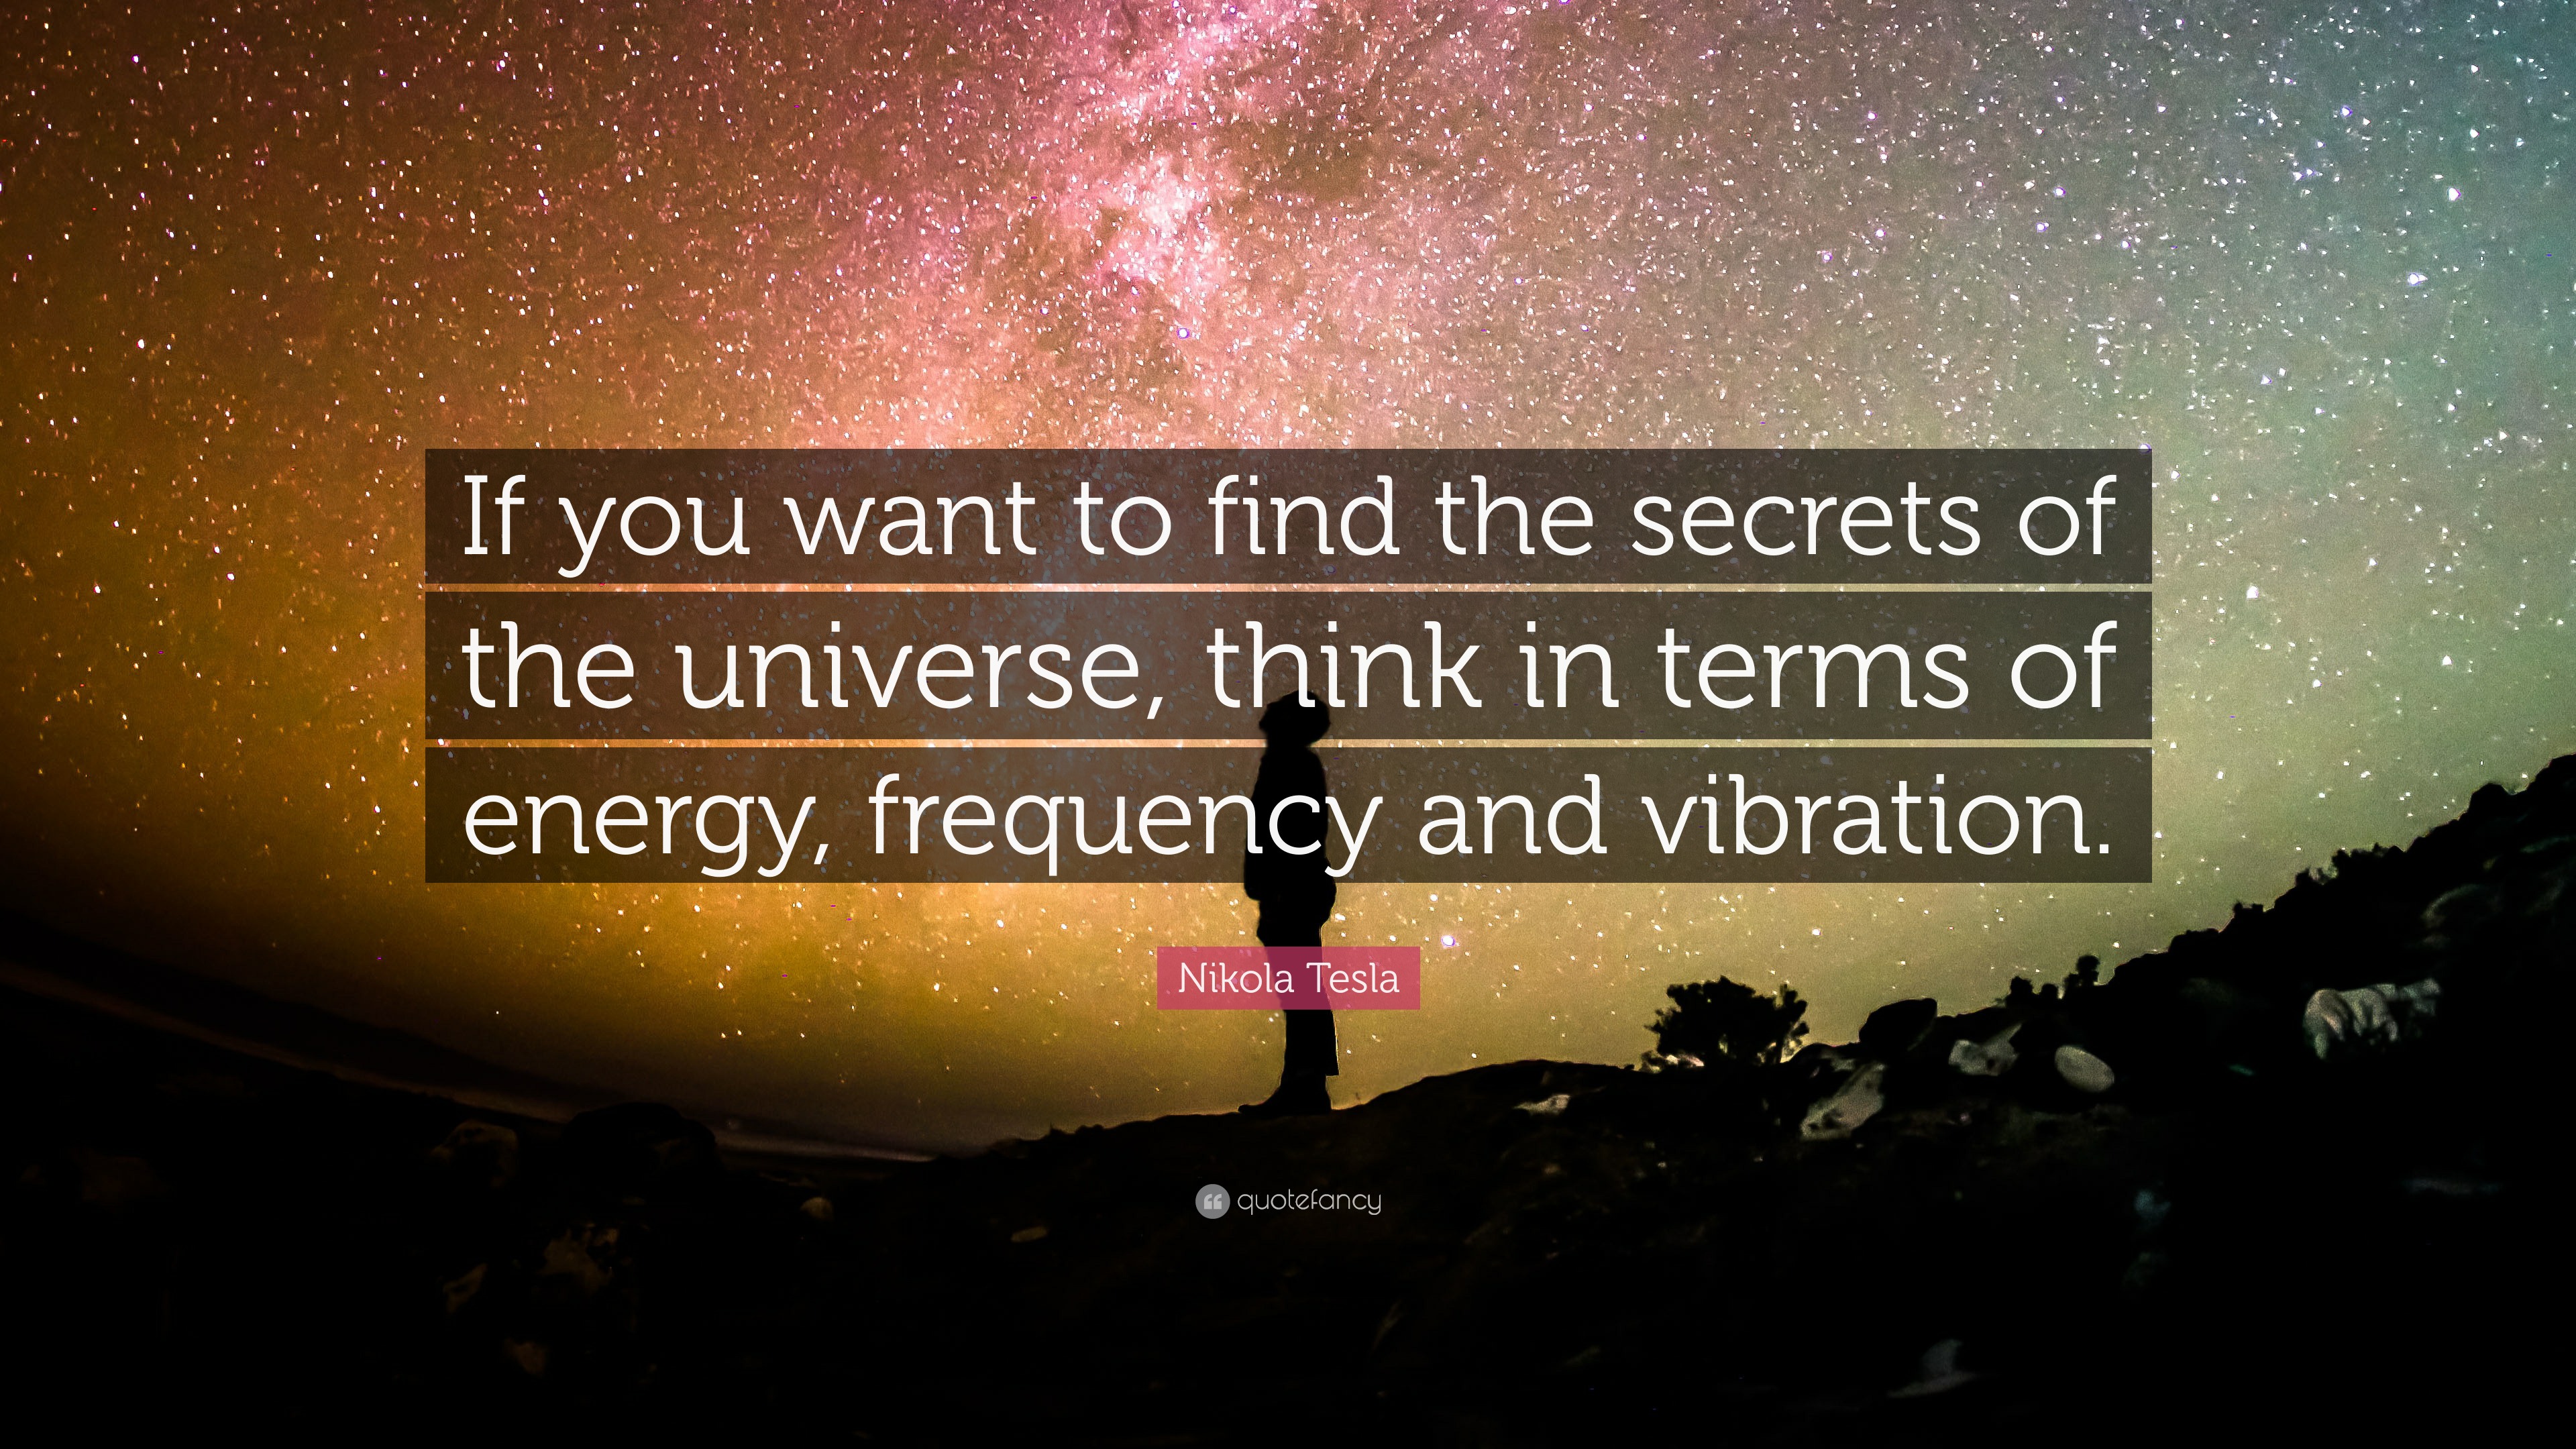 Nikola Tesla Quote: "If you want to find the secrets of ...